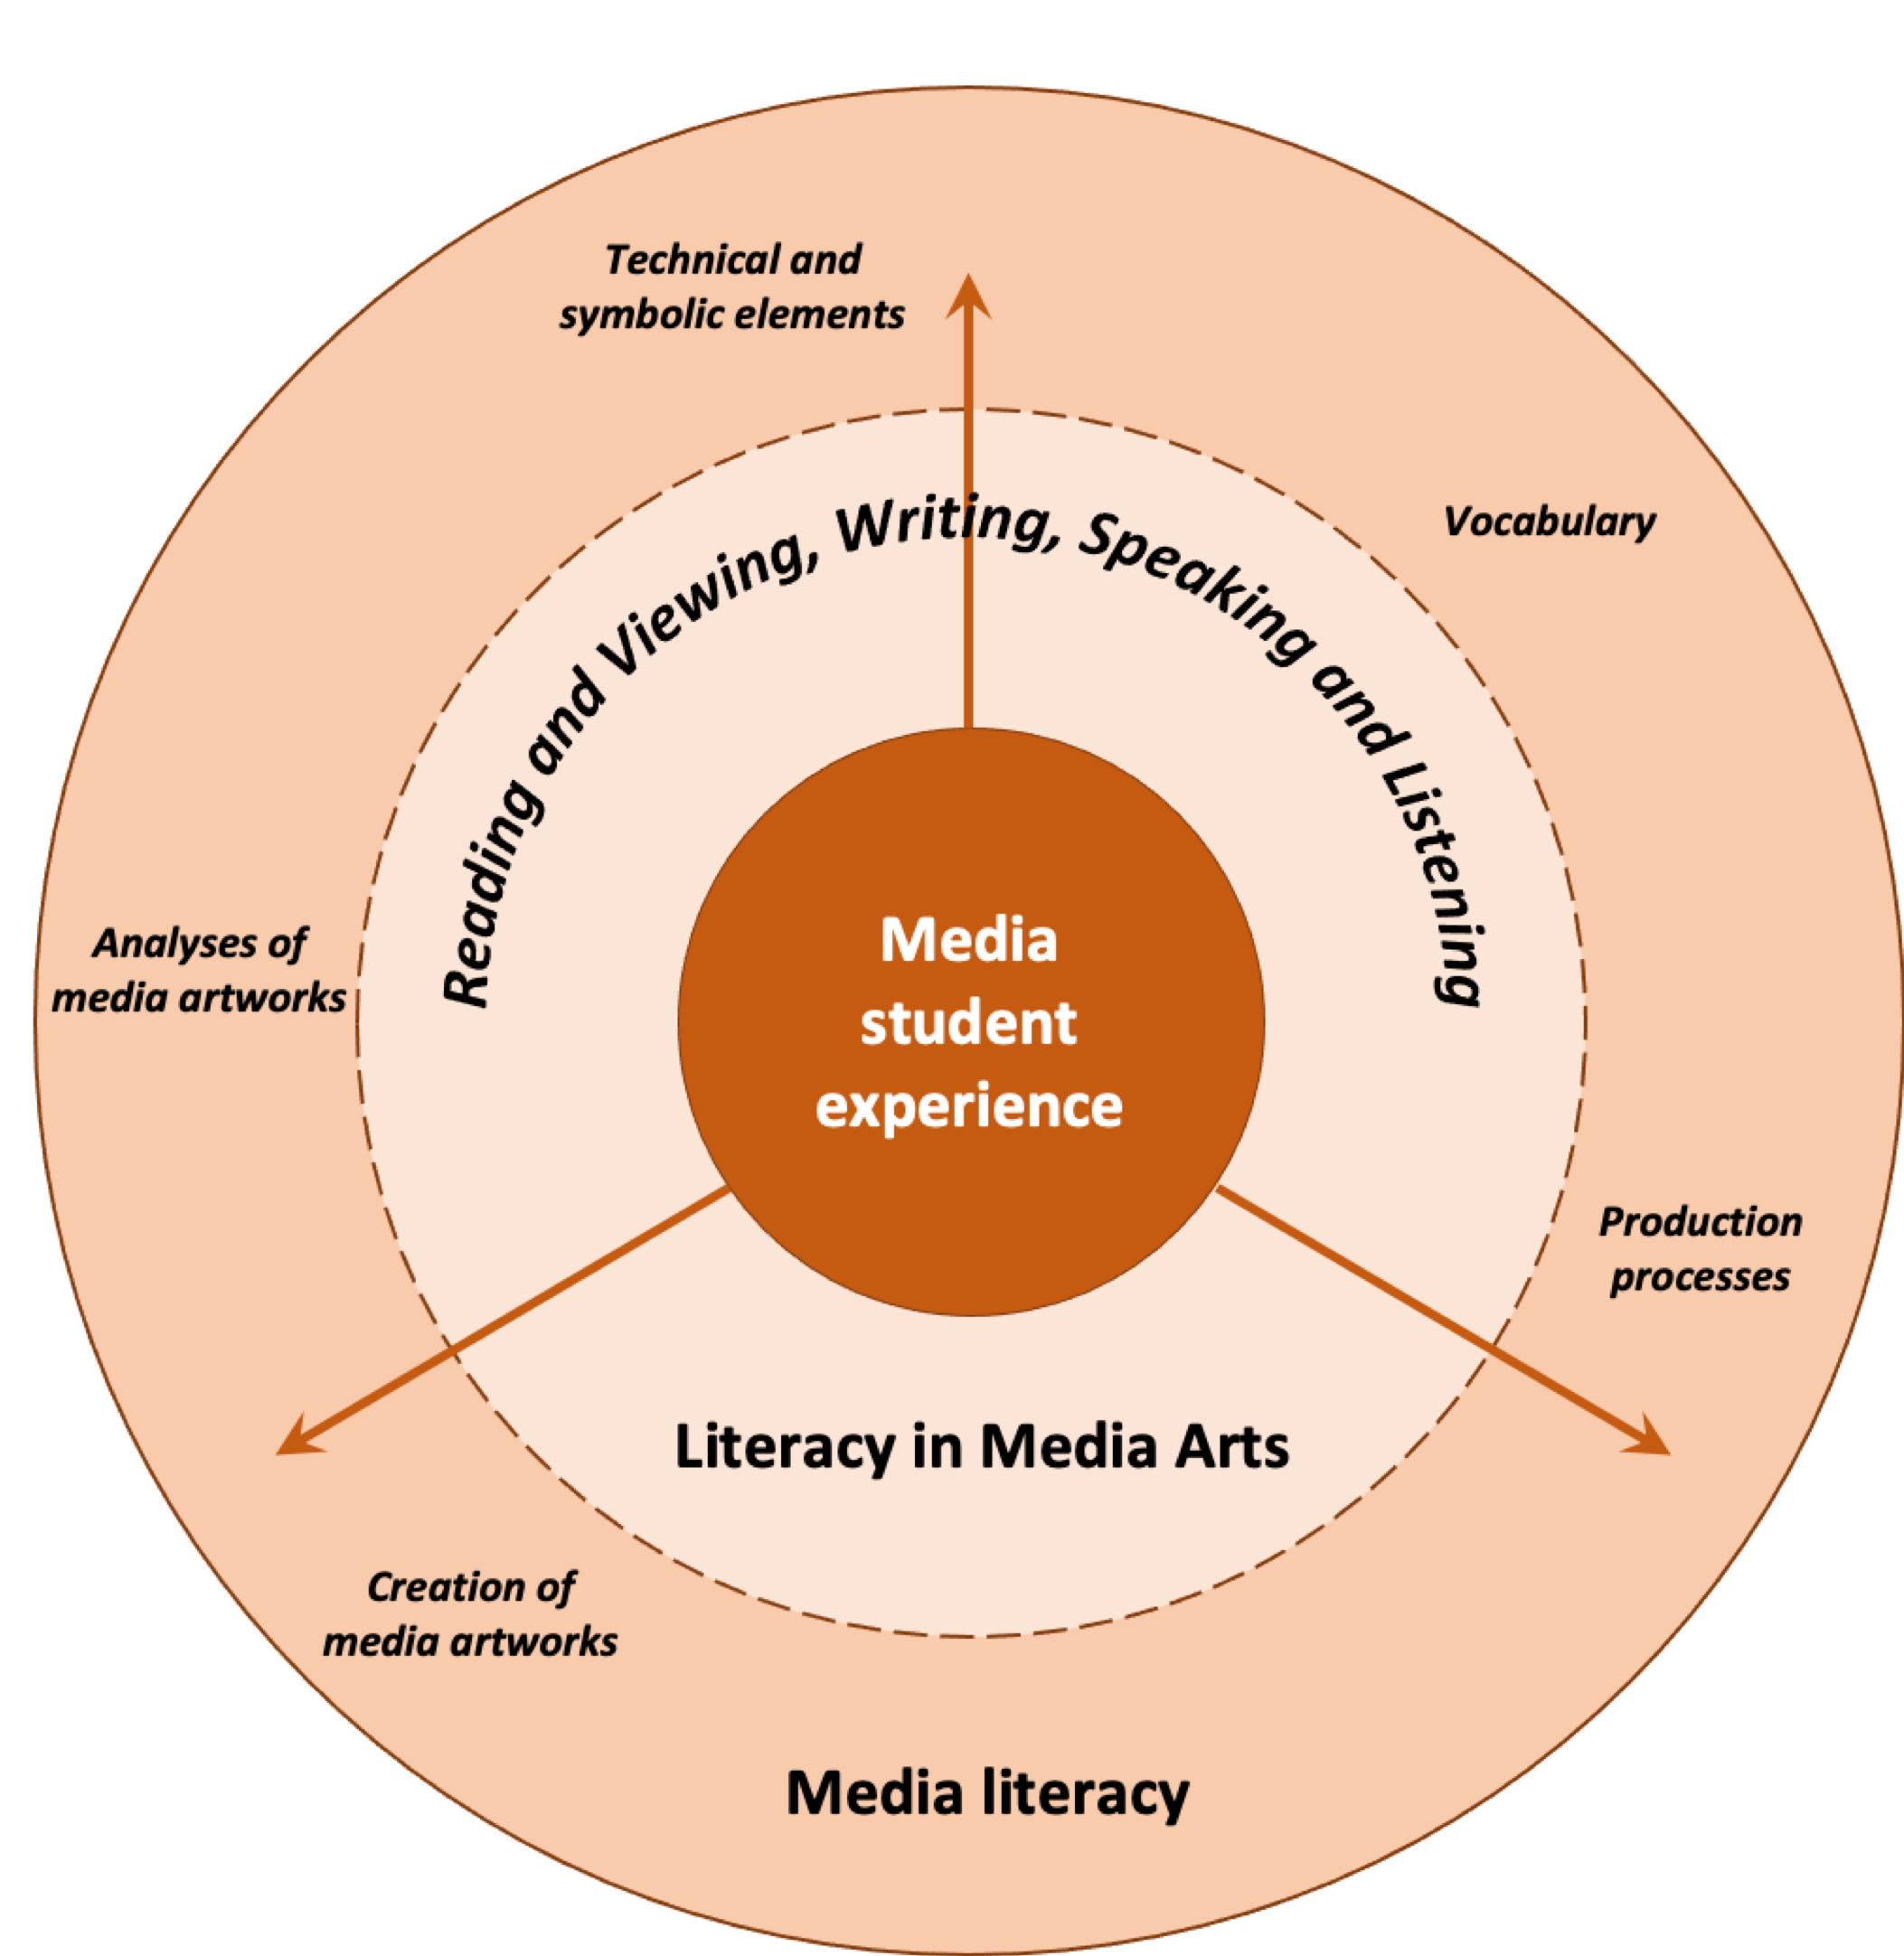 A diagram showing the relationship between media student experience, literacy in media arts, and media literacy. It includes three concentric circles. The media student experience is in the inner circle. It is surrounded by literacy in media arts, which includes reading and viewing, writing, and speaking and listening. As students develop literacy in media arts, they move to the outermost circle to develop their media literacy, including vocabulary, knowledge of technical and symbolic elements and production processes, and how to create and analyse media artworks.